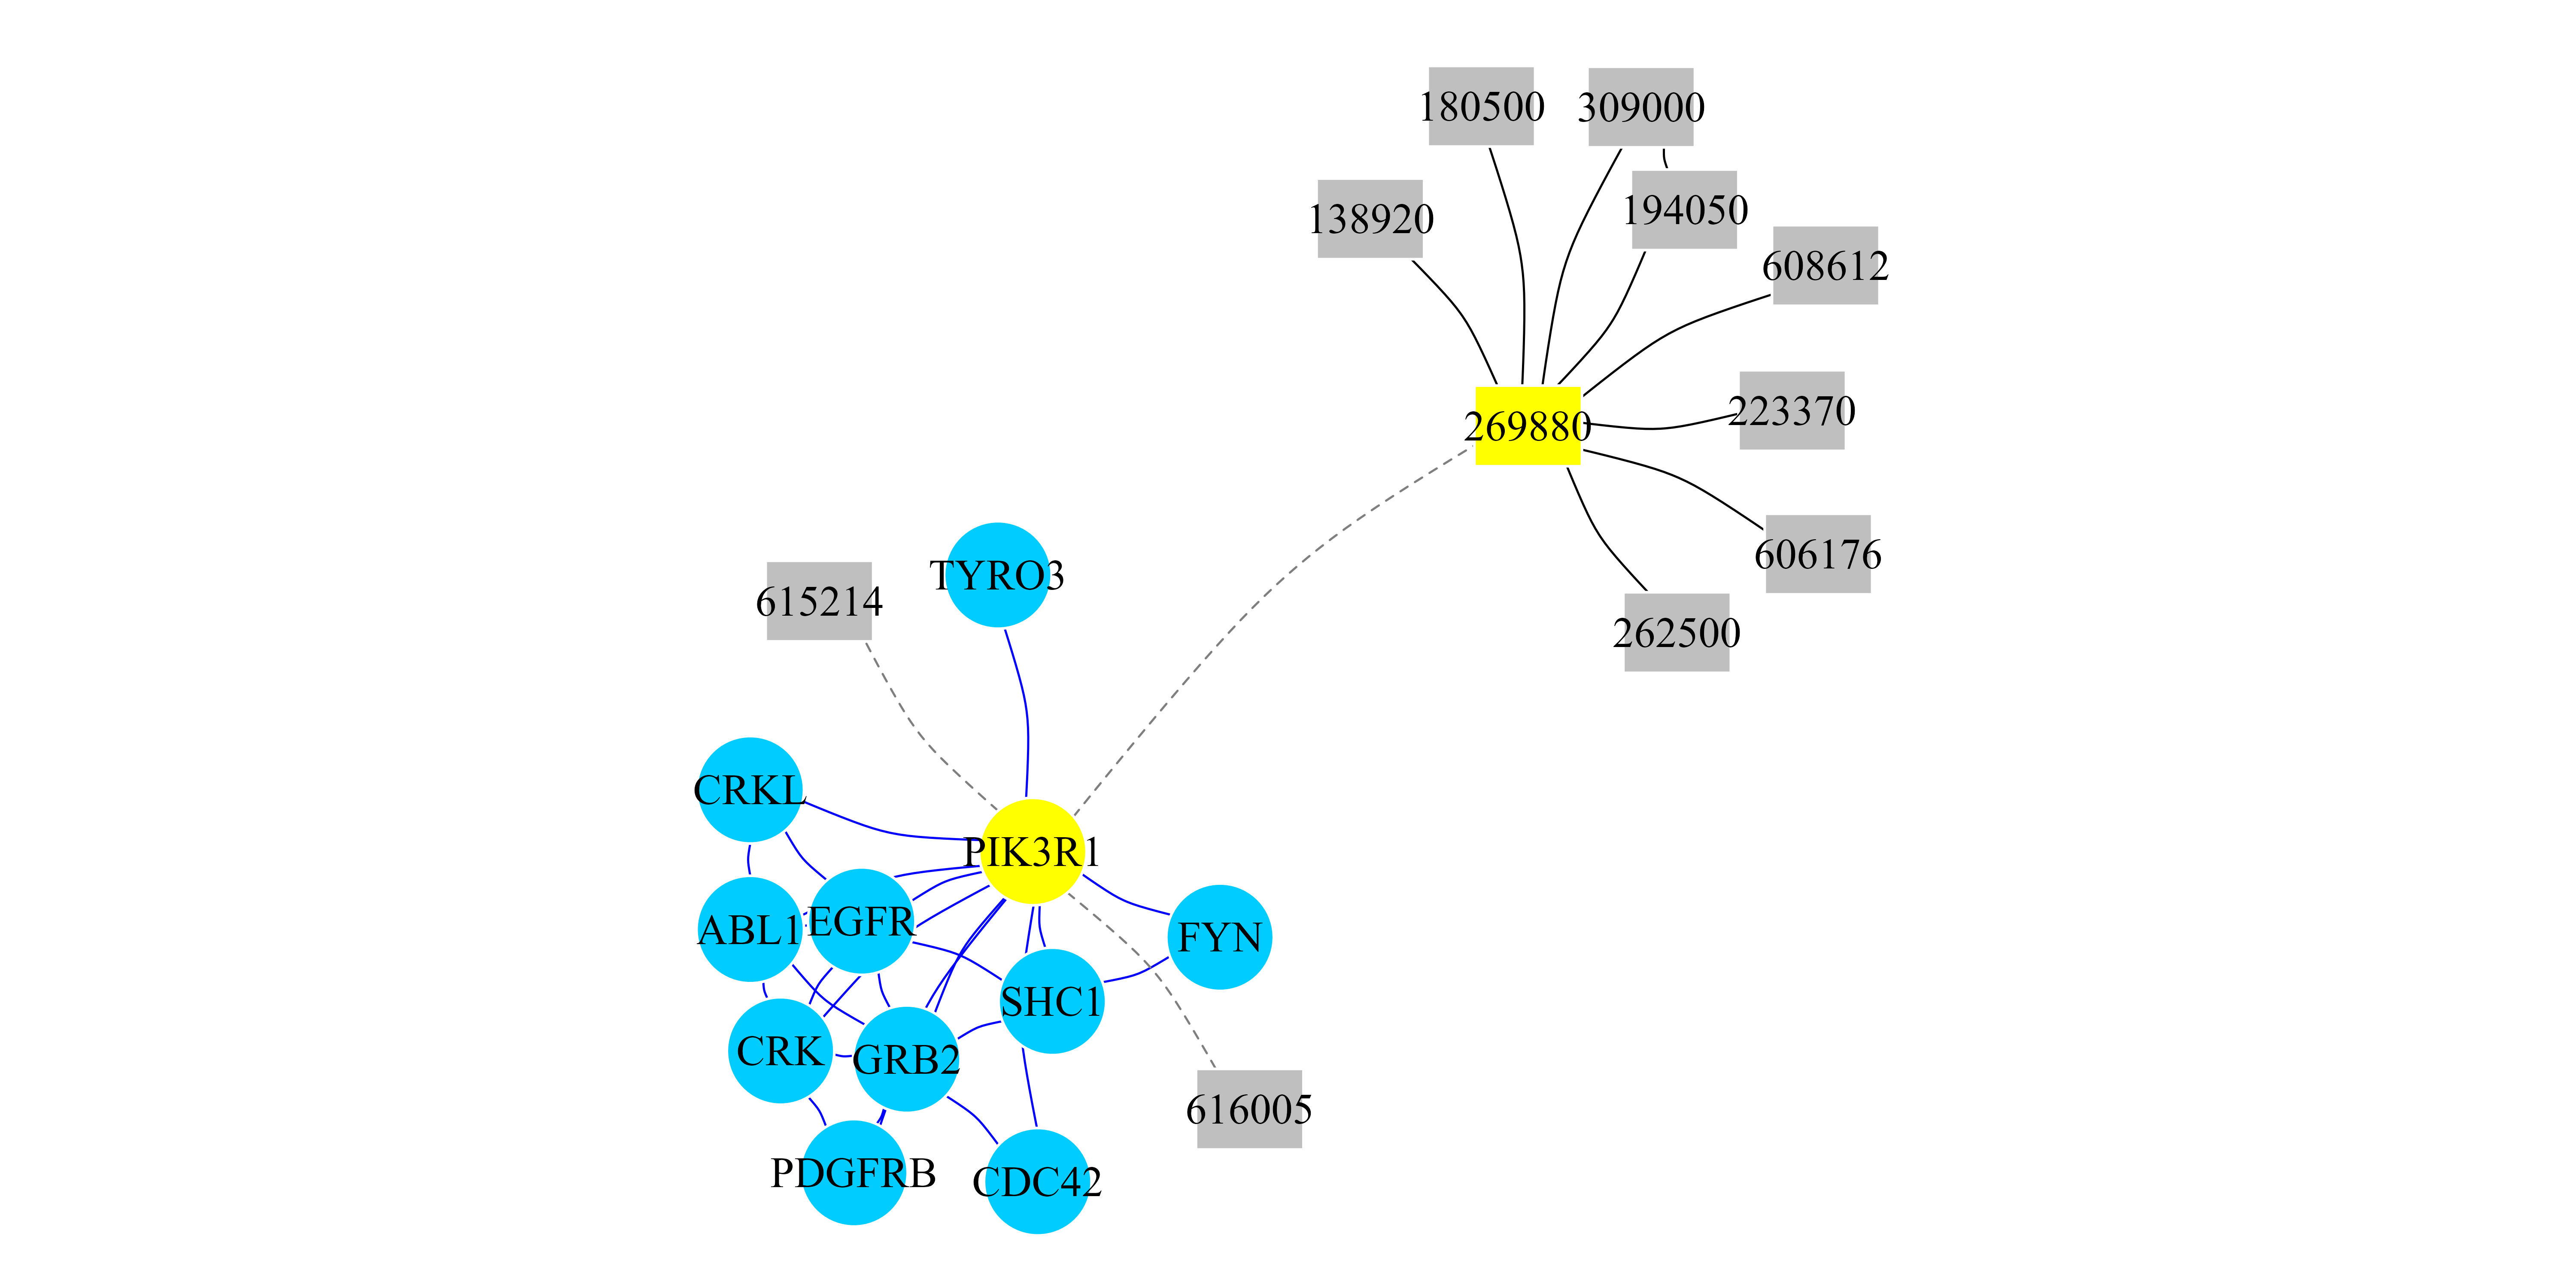 Figure 2: RWR-H on a heterogeneous PPI-Disease Network. Network representation of the top 10 ranked genes and the top 10 ranked diseases when the RWR-H algorithm is executed using the PIK3R1 gene and the SHORT syndrome disease (MIM code: 269880) as seeds (yellow nodes). Circular nodes represent genes and rectangular nodes show diseases. Blue edges are PPI interactions and black edges are similarity links between diseases. Dashed edges are the bipartite gene-disease associations.